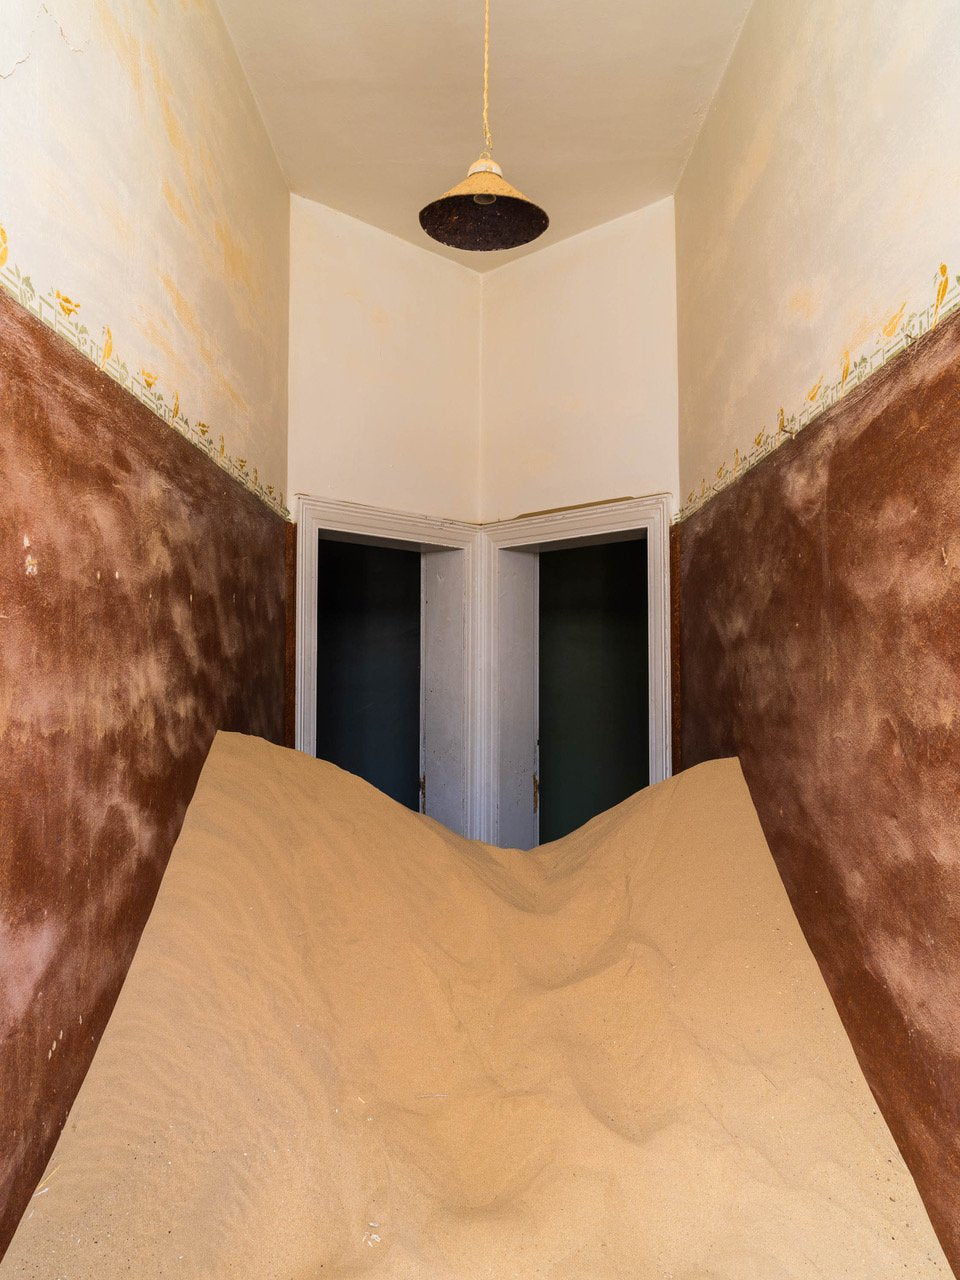 Sand placed in a house corridor, Namibia #43, Africa